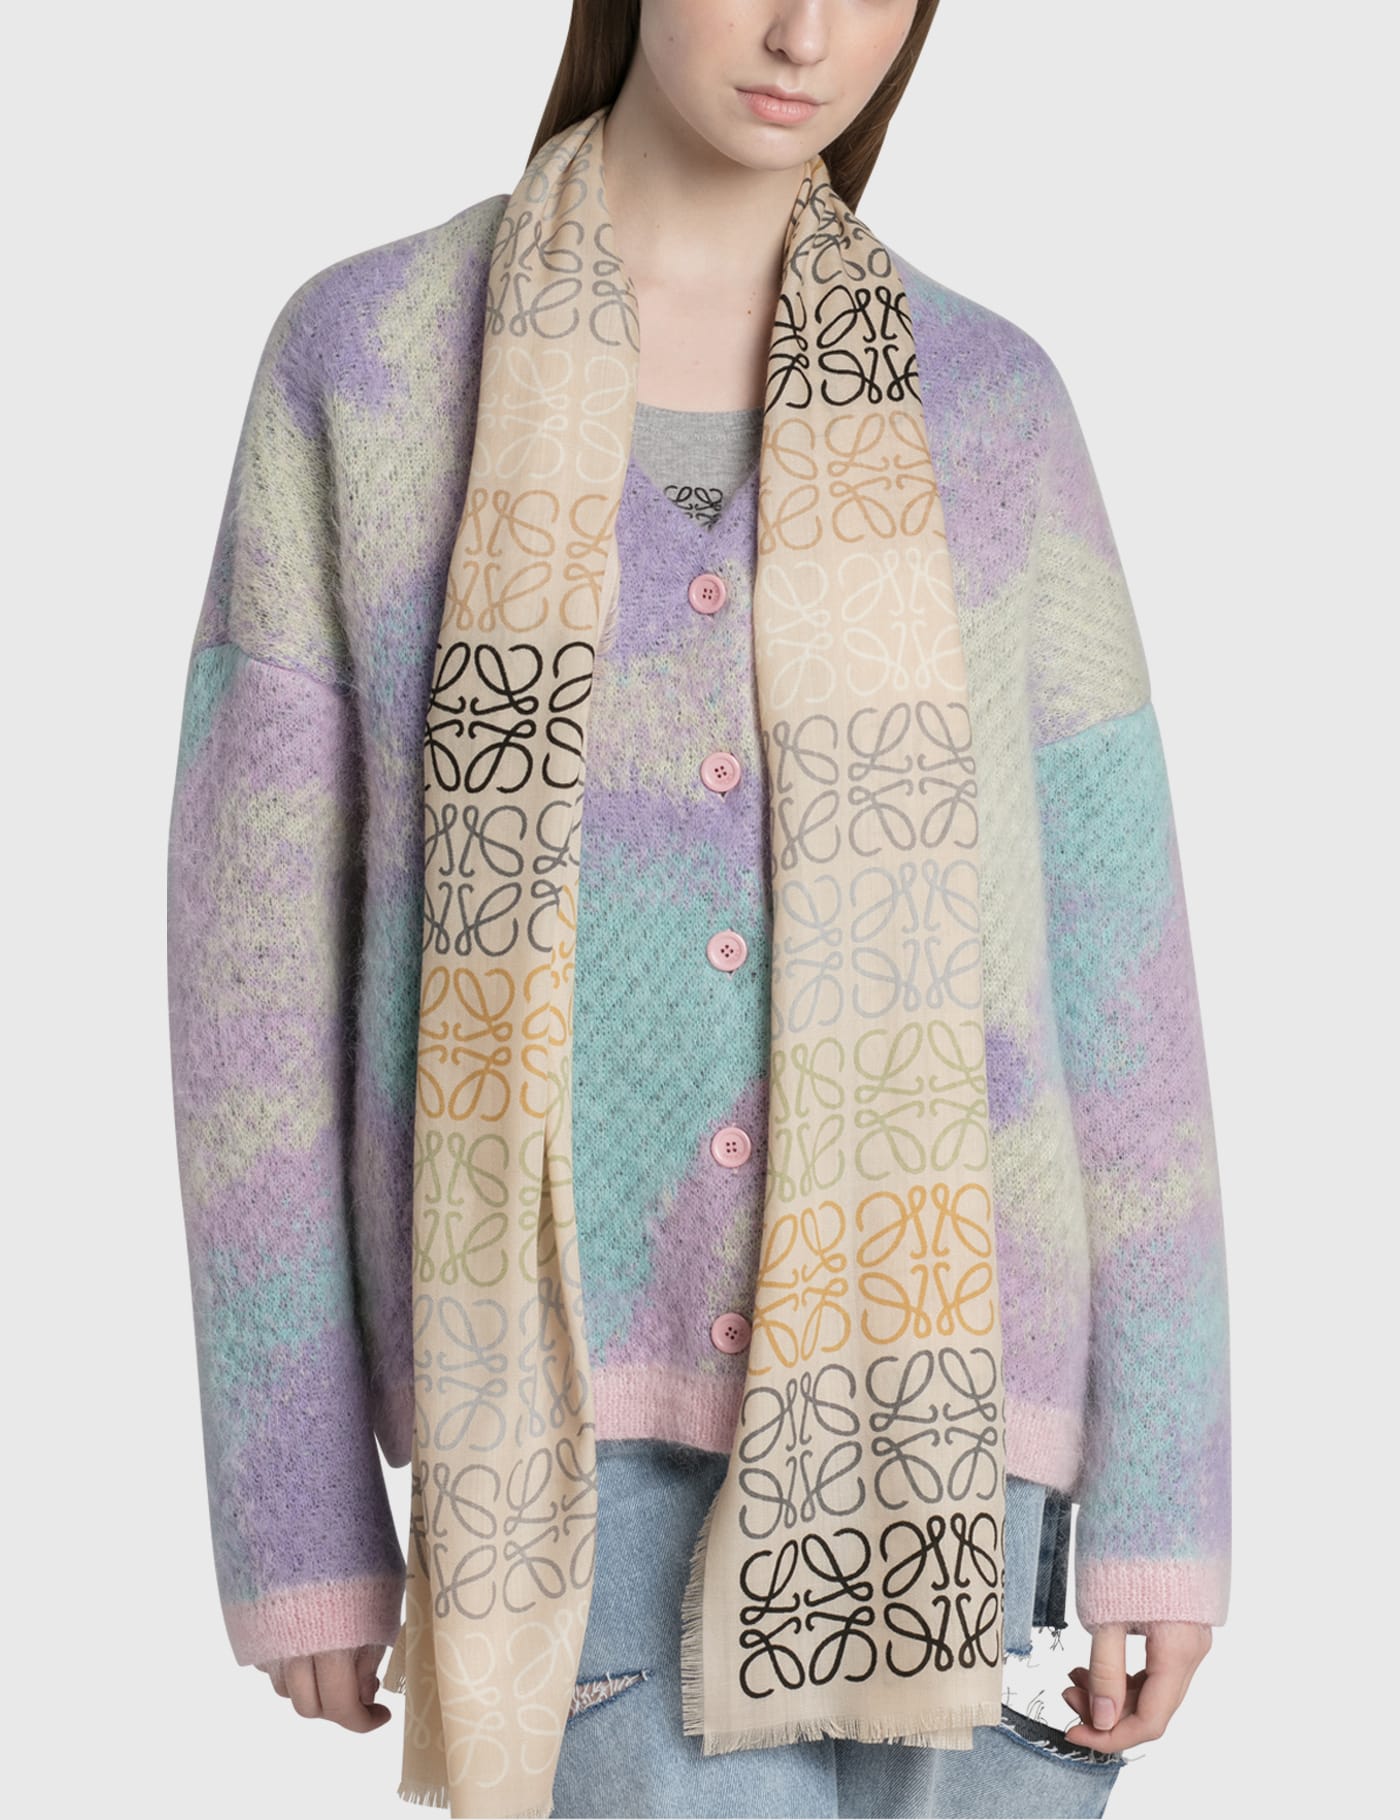 Loewe - Anagram Lines Scarf | HBX - Globally Curated Fashion and 